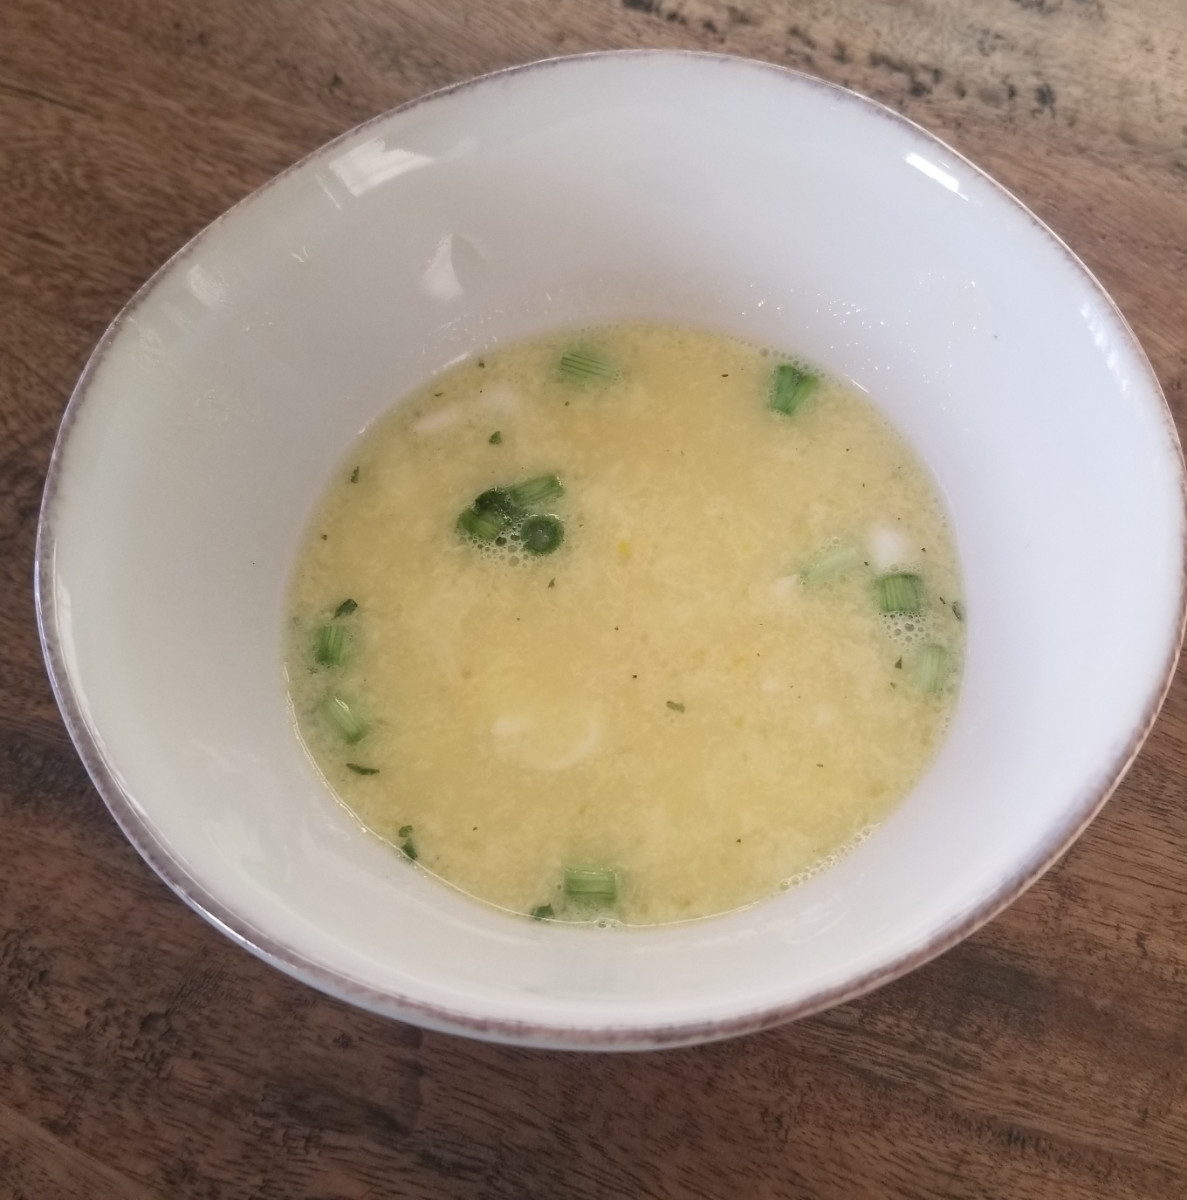 Bone broth chicken egg drop soup with a hint of saffron